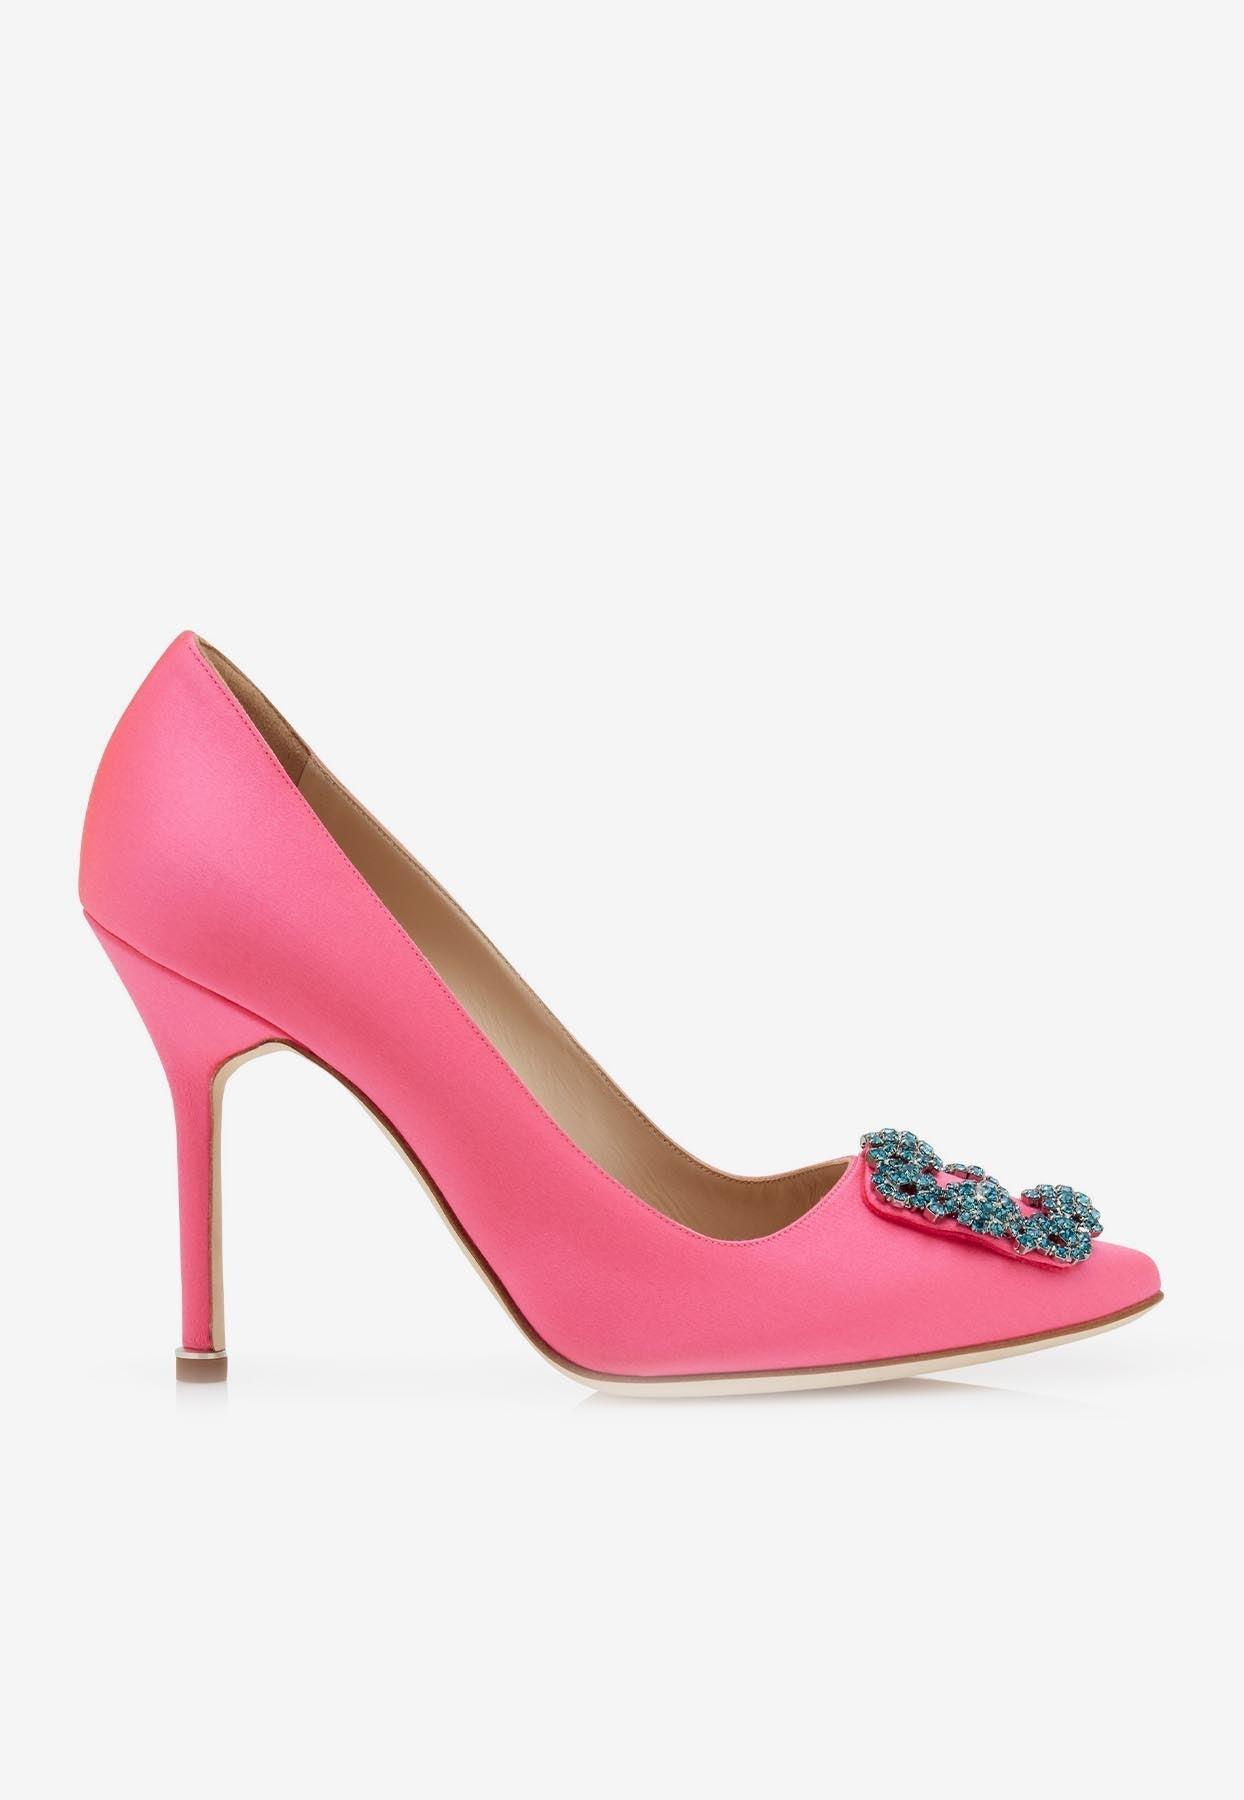 Manolo Blahnik Hangisi 105 Satin Pumps With Crystal Buckle in Pink | Lyst